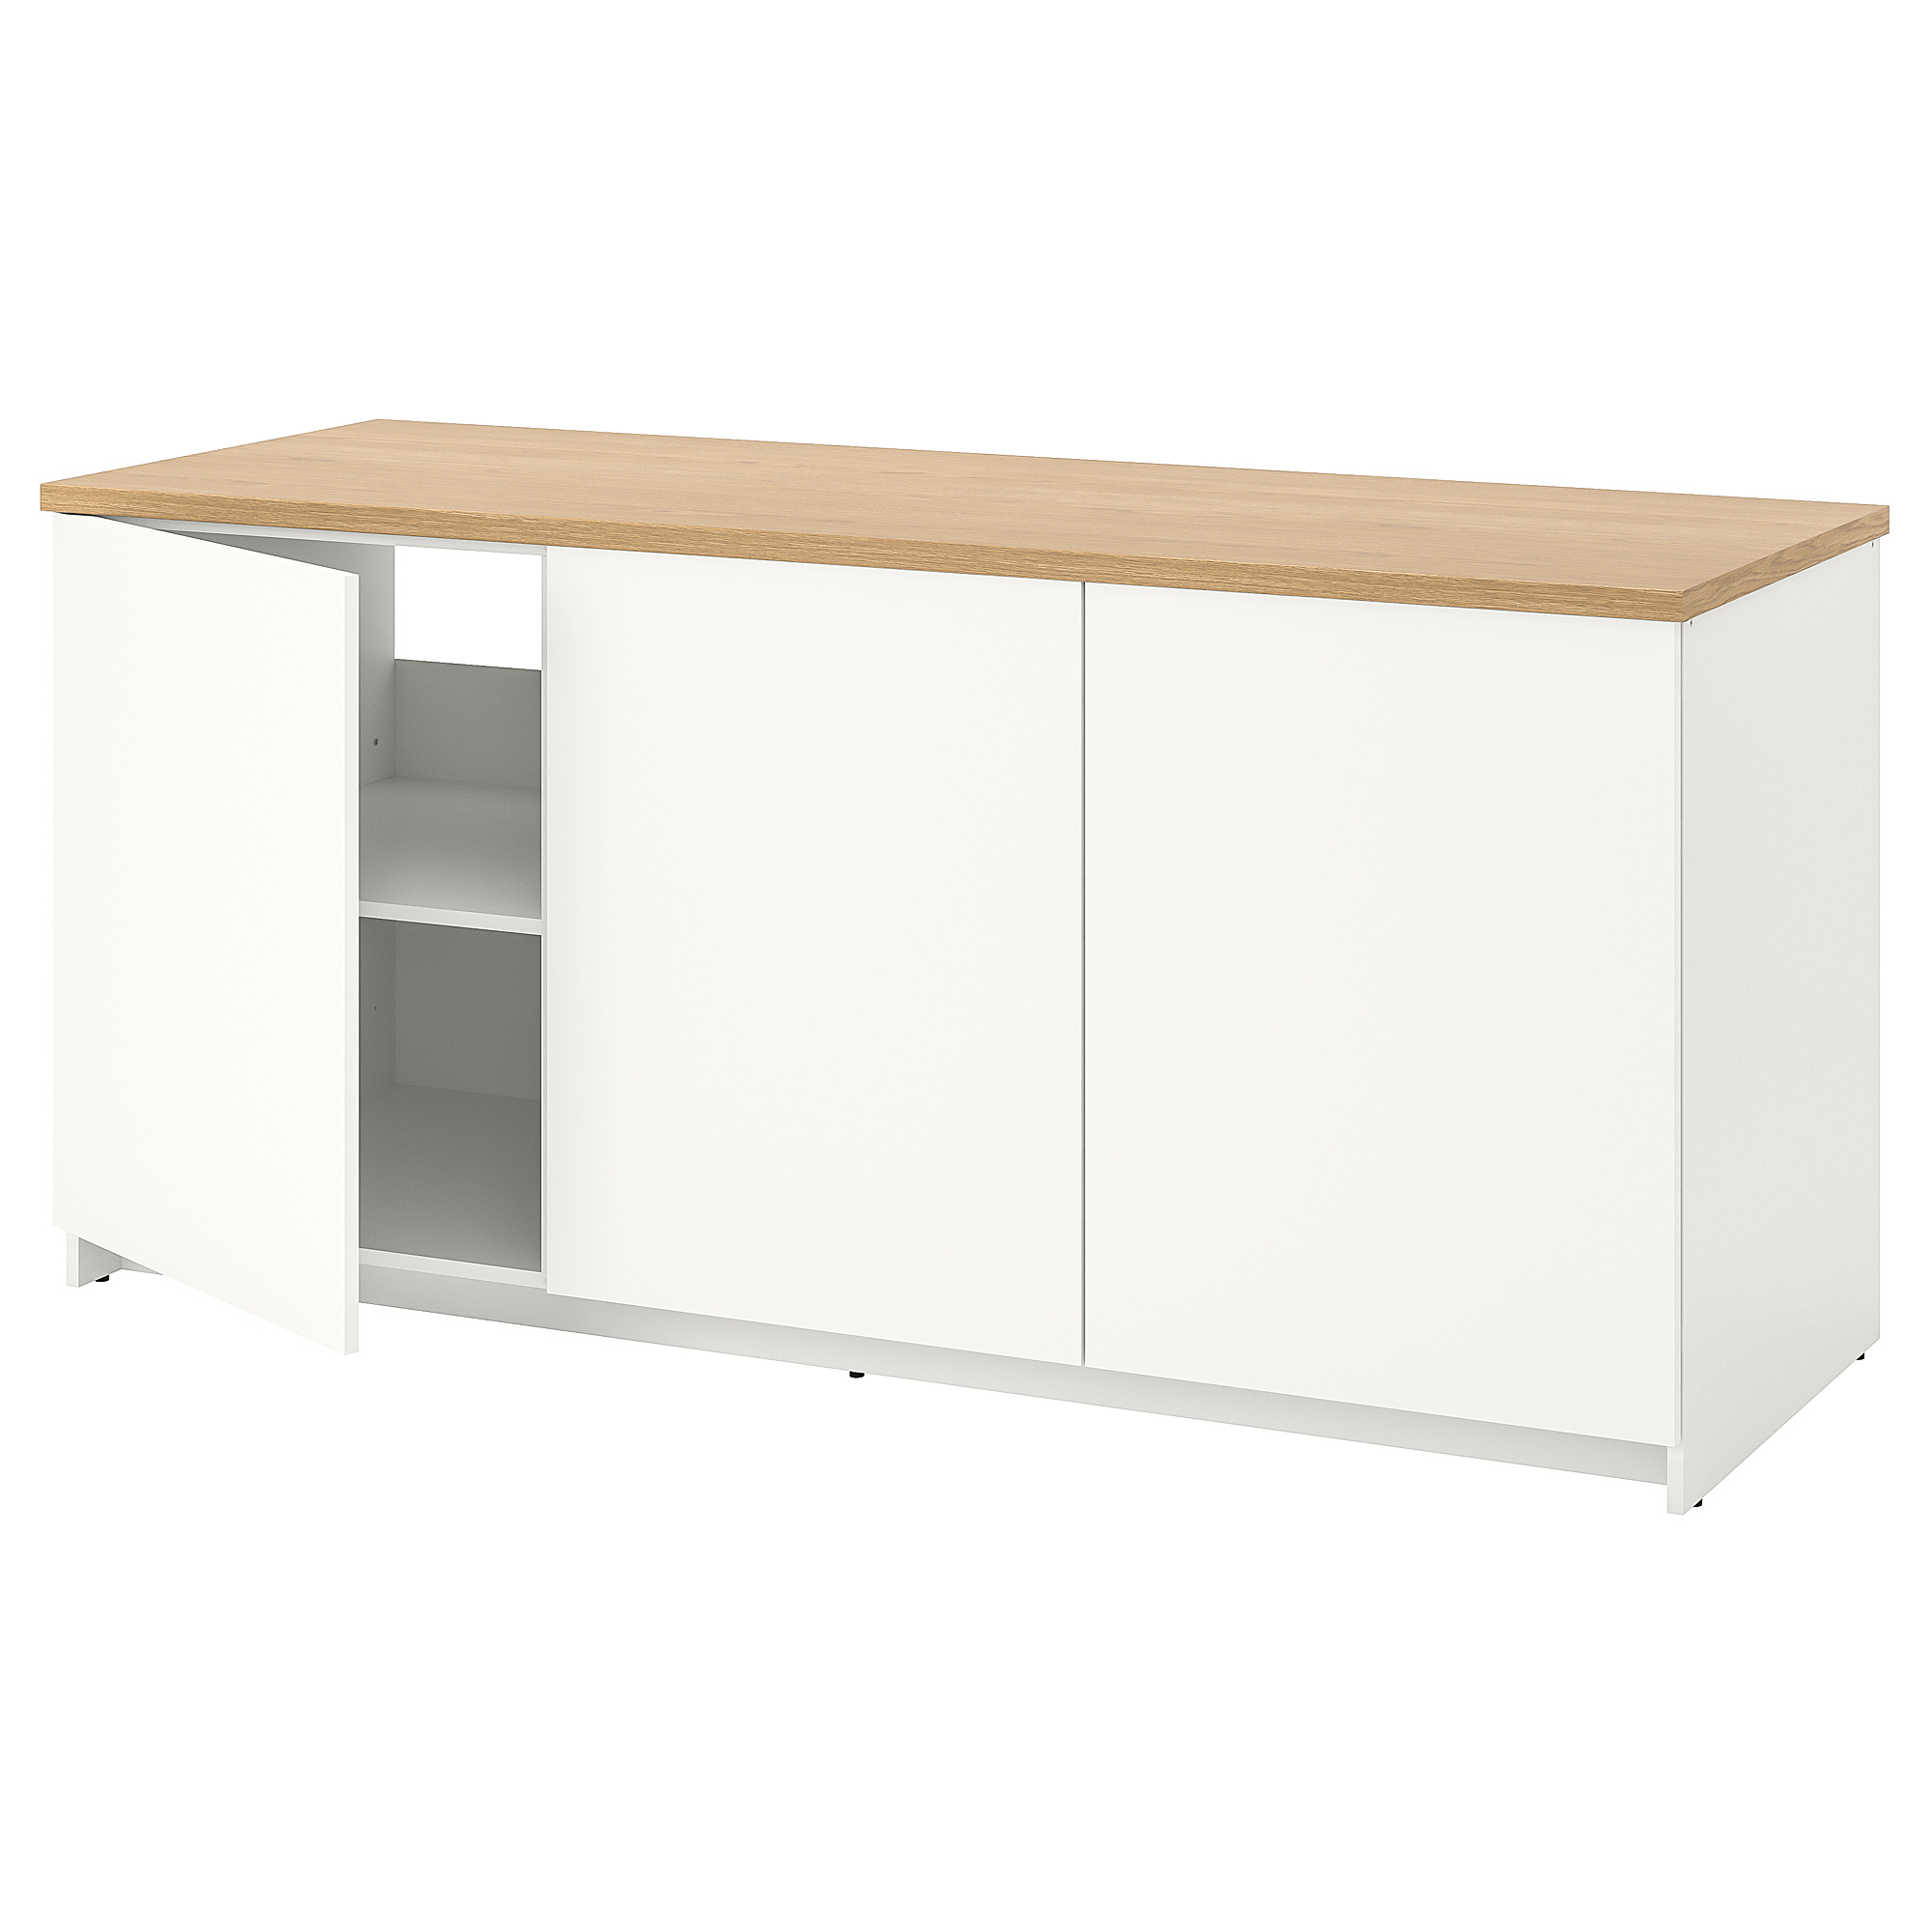 KNOXHULT base cabinet with doors